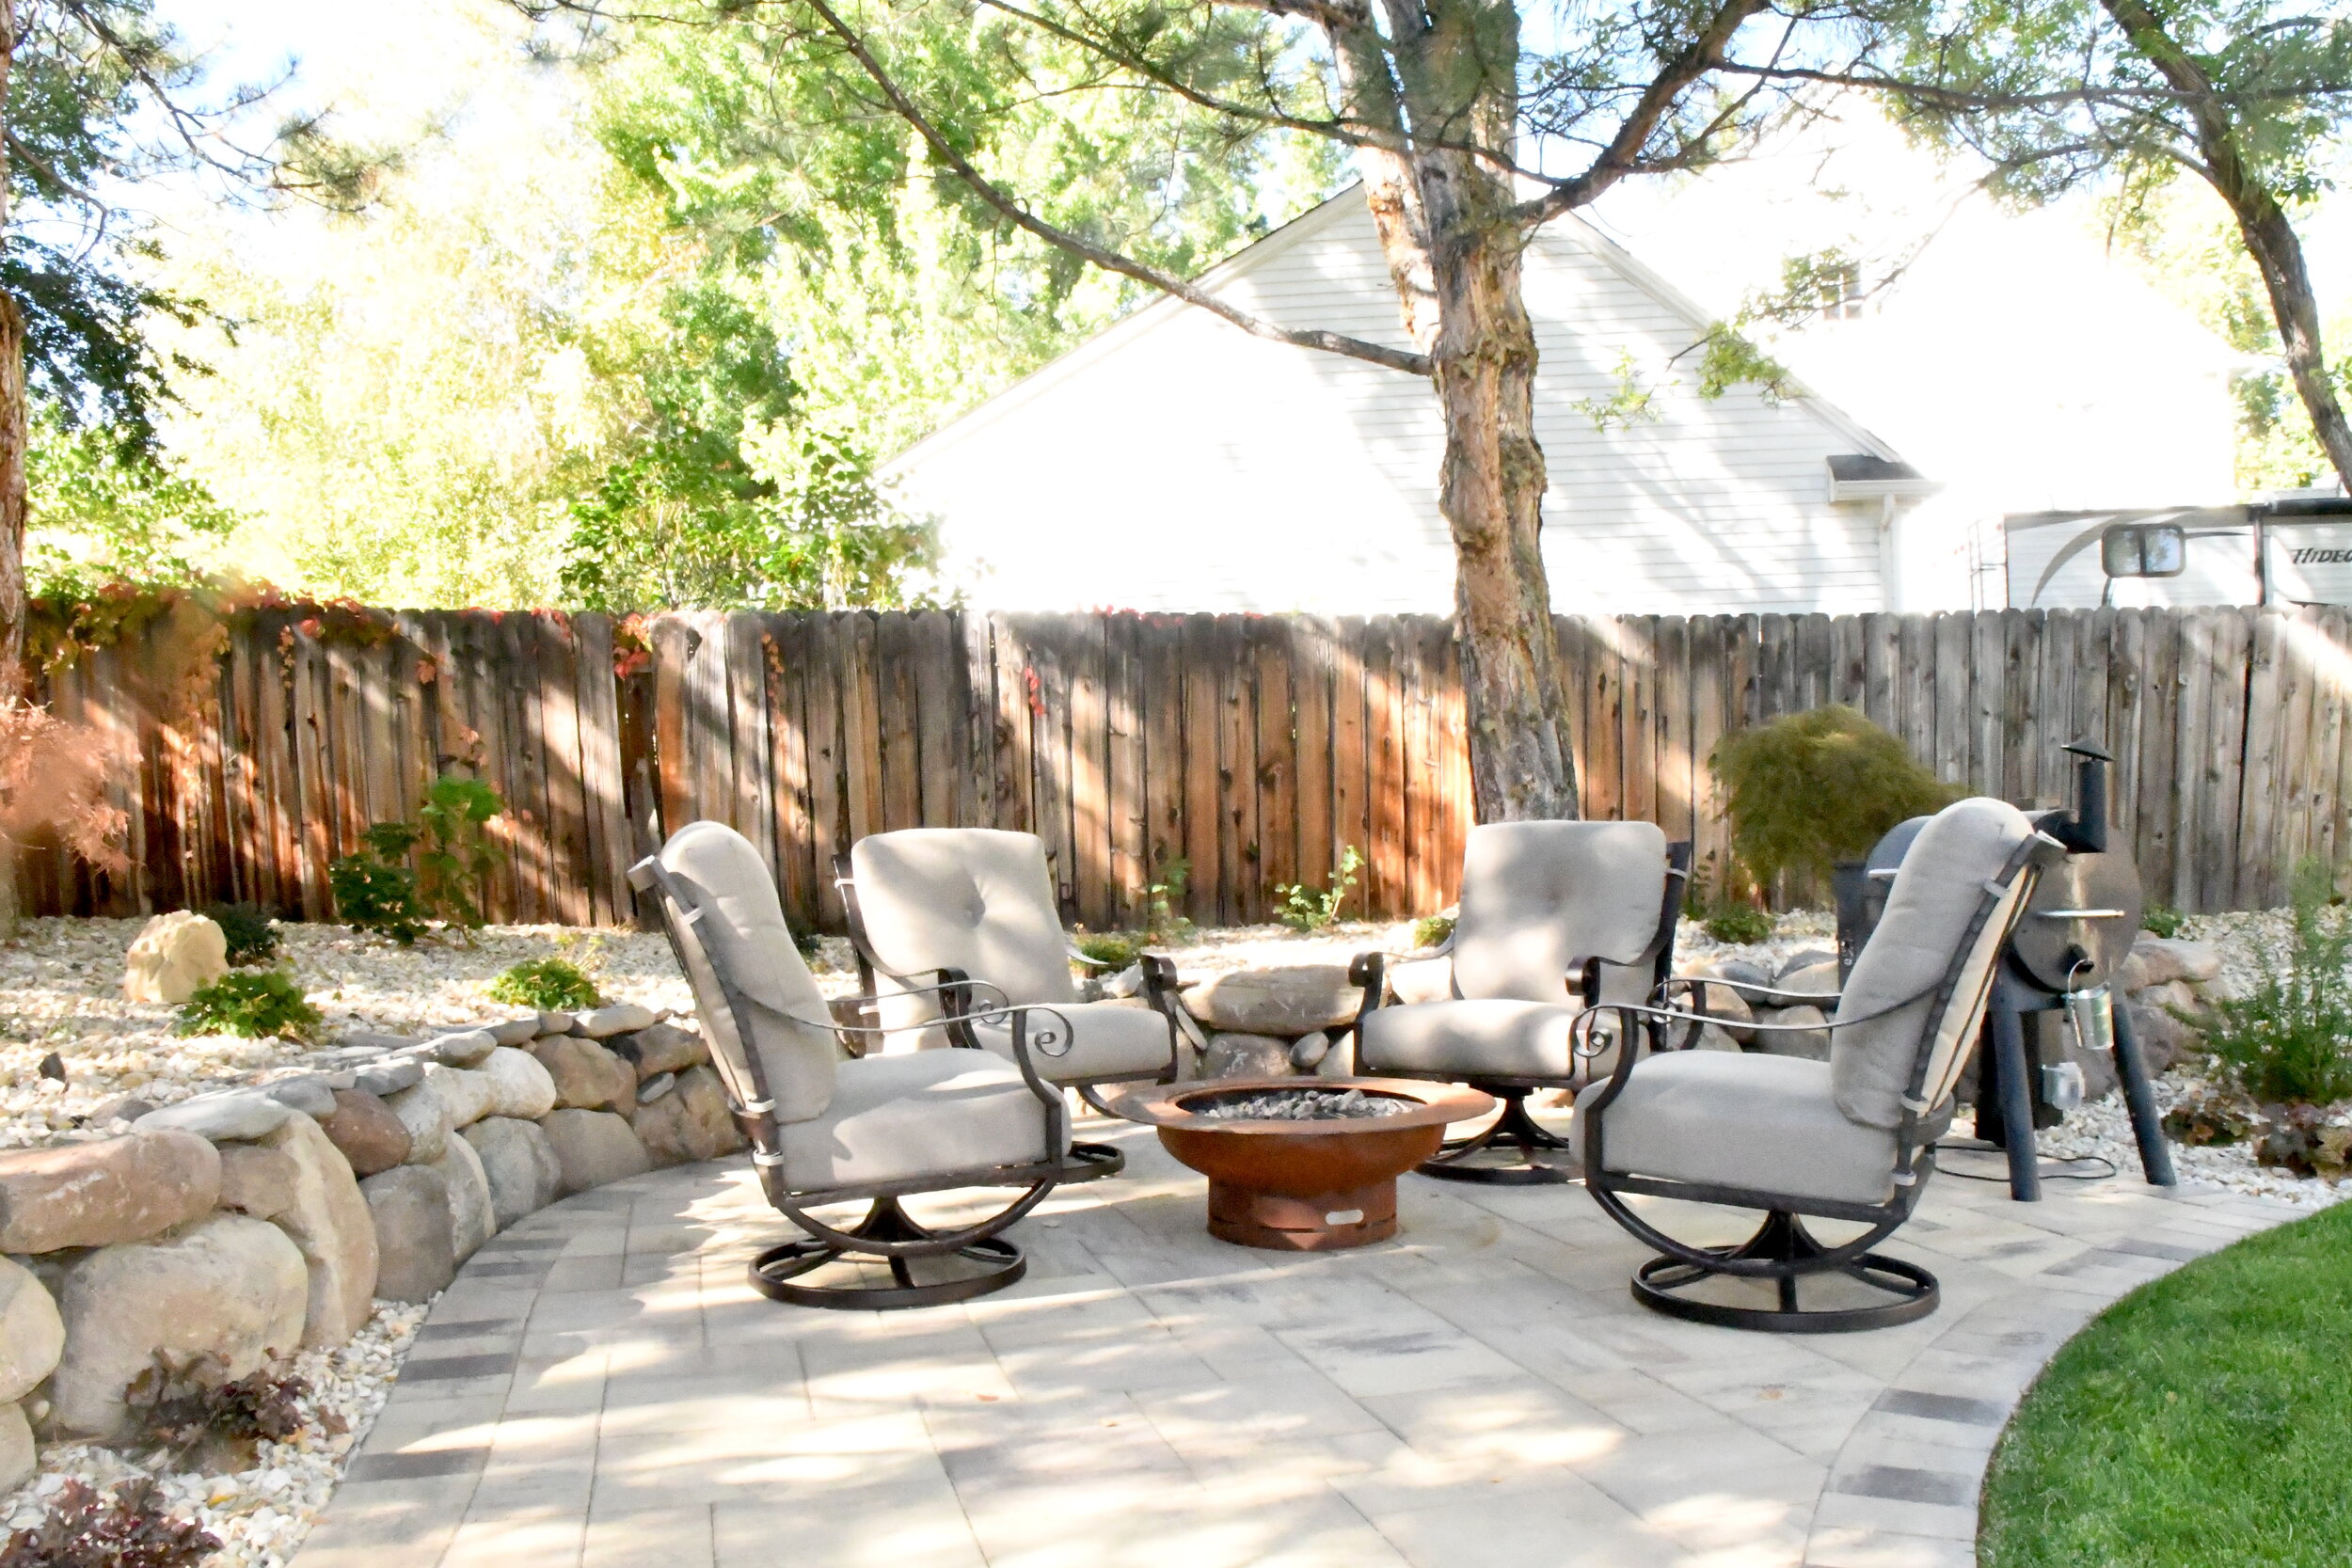 Las Vegas Nv Area Firesky Outdoor, Patio And Landscaping Companies